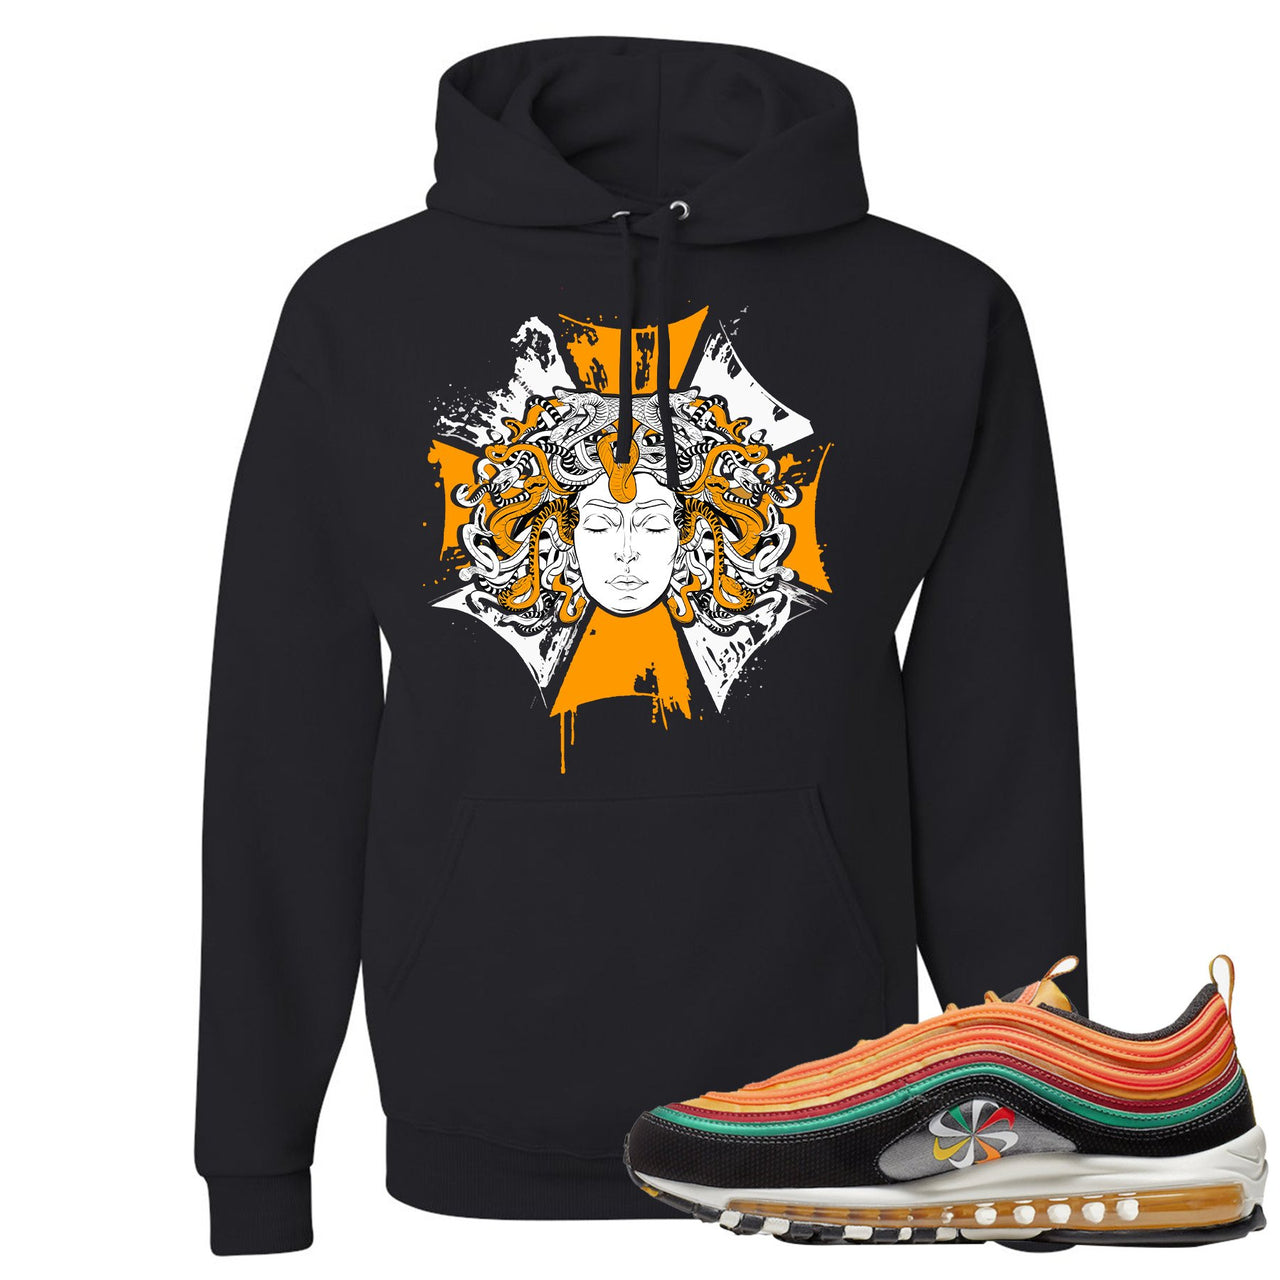 Printed on the front of the Air Max 97 Sunburst black sneaker matching pullover hoodie is the Medusa logo